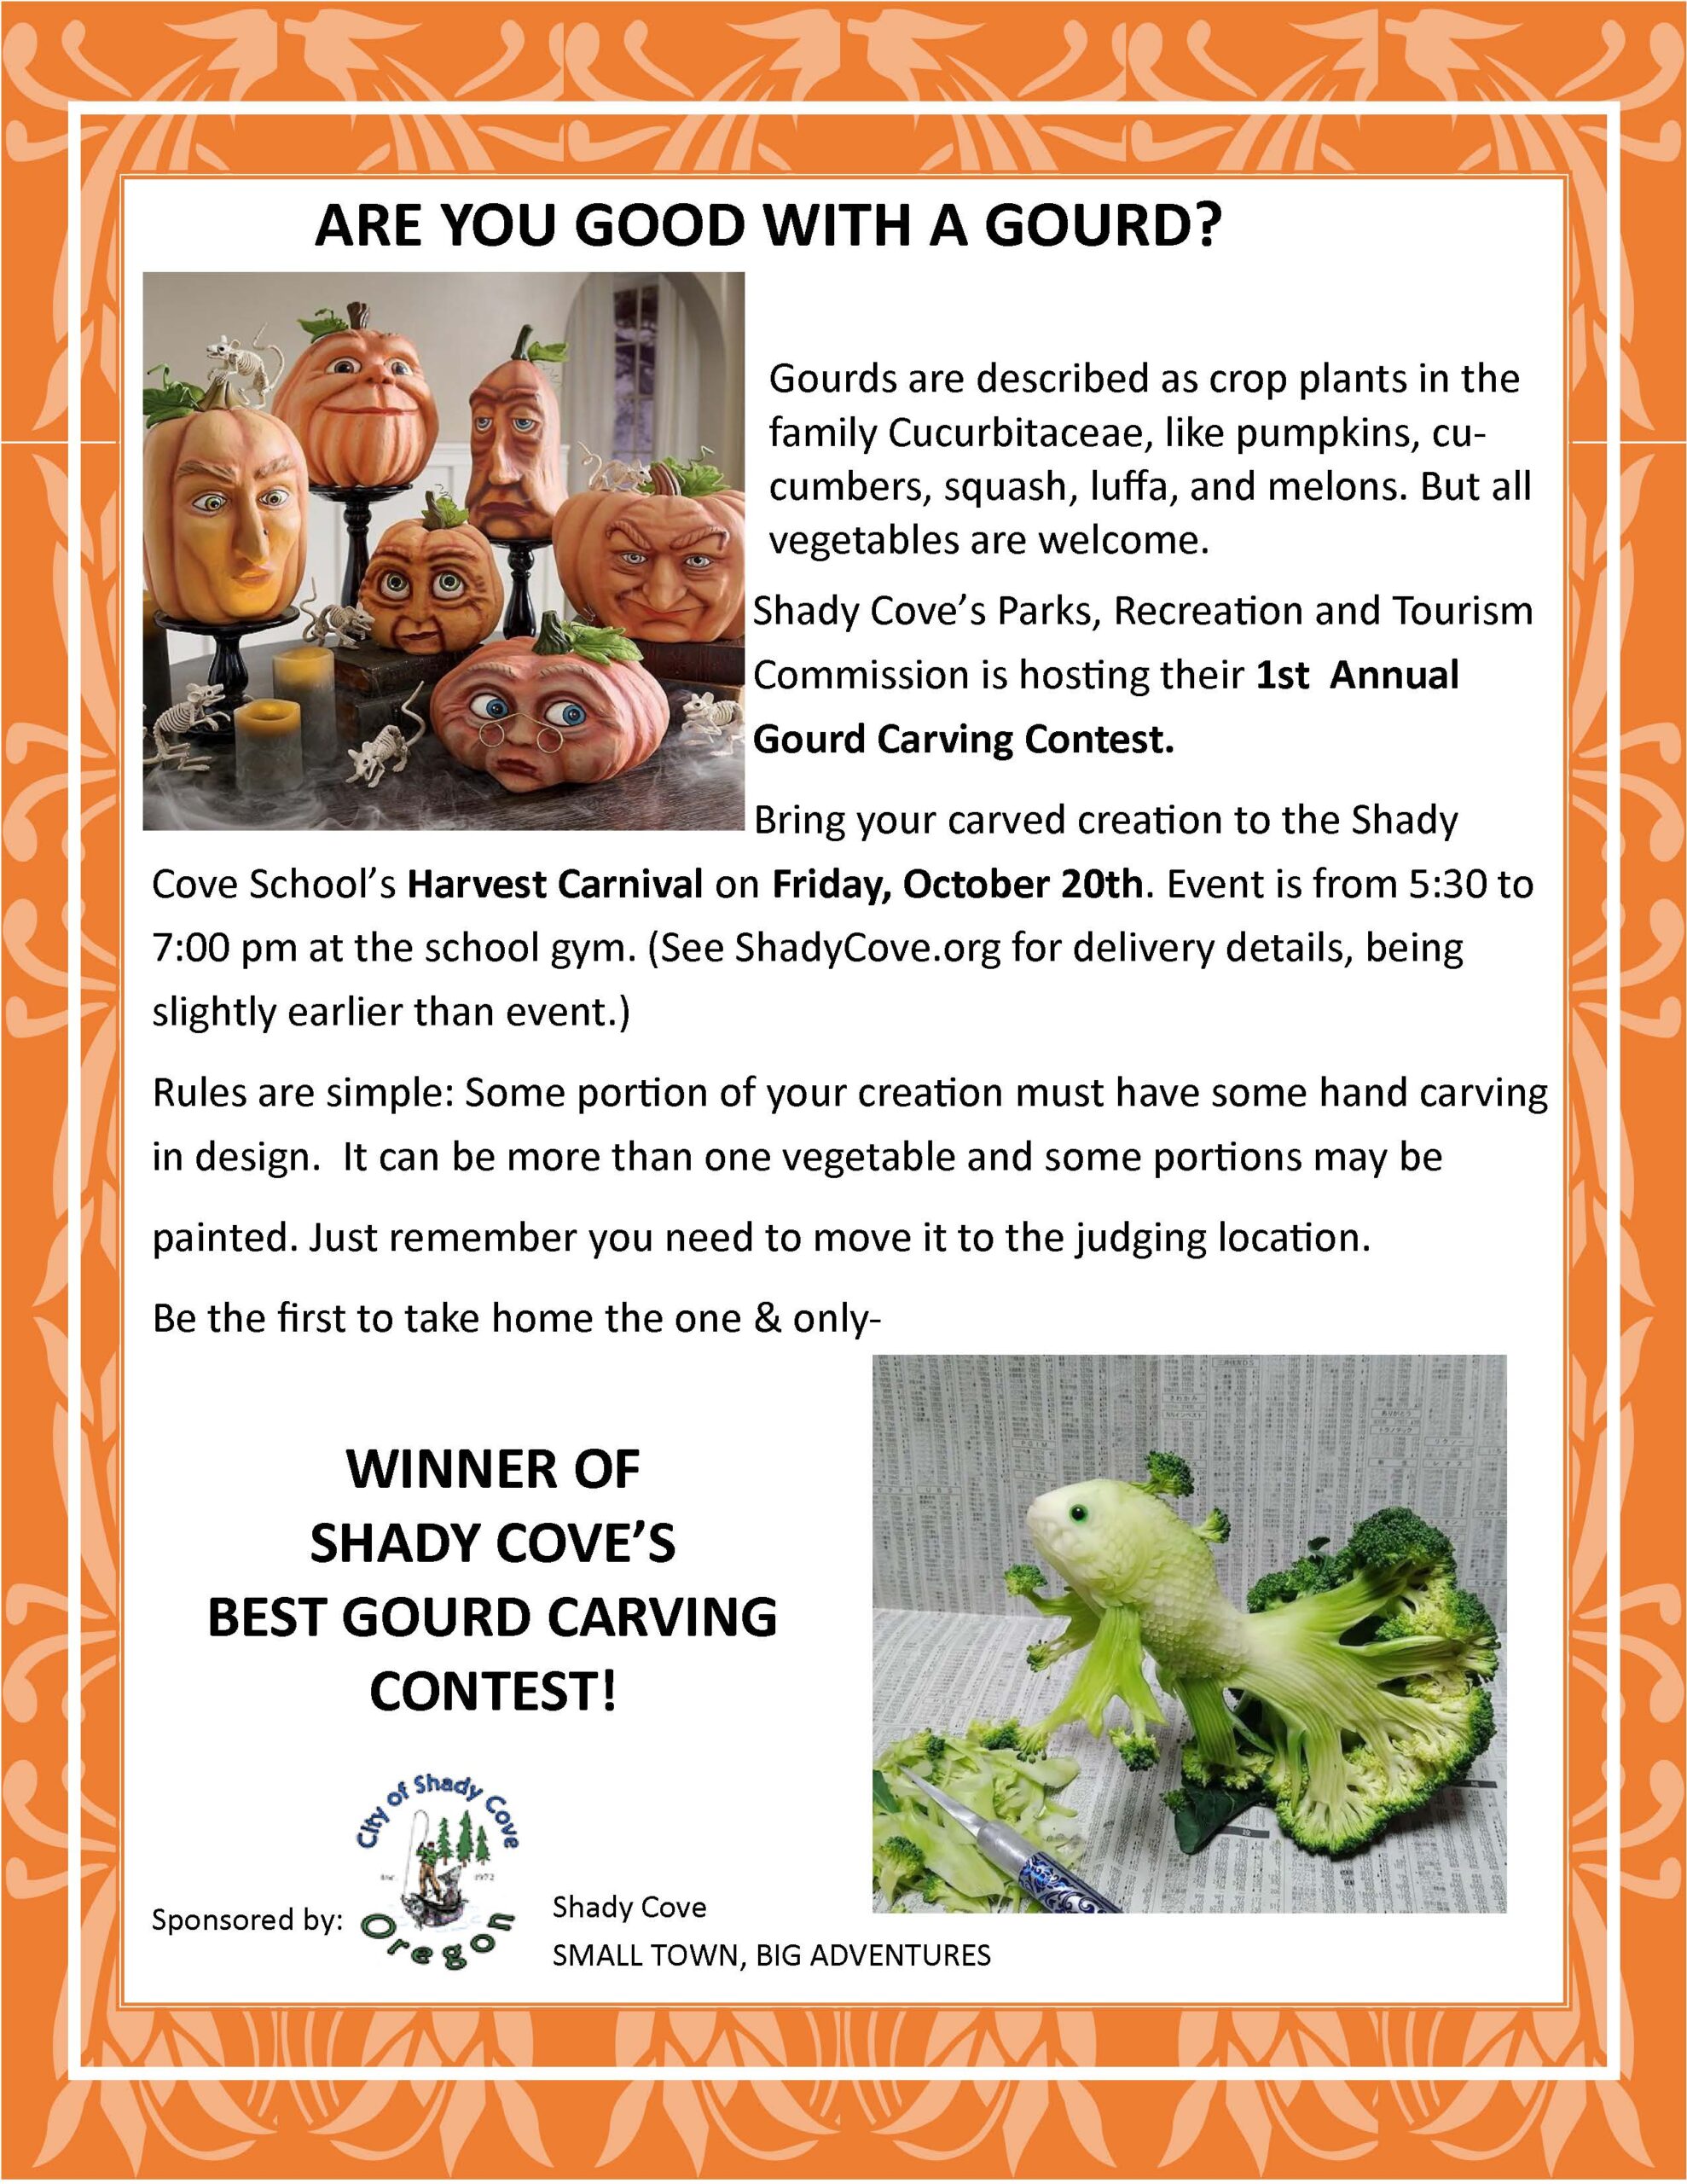 1st Annual Shady Cove Gourd Carving Contest